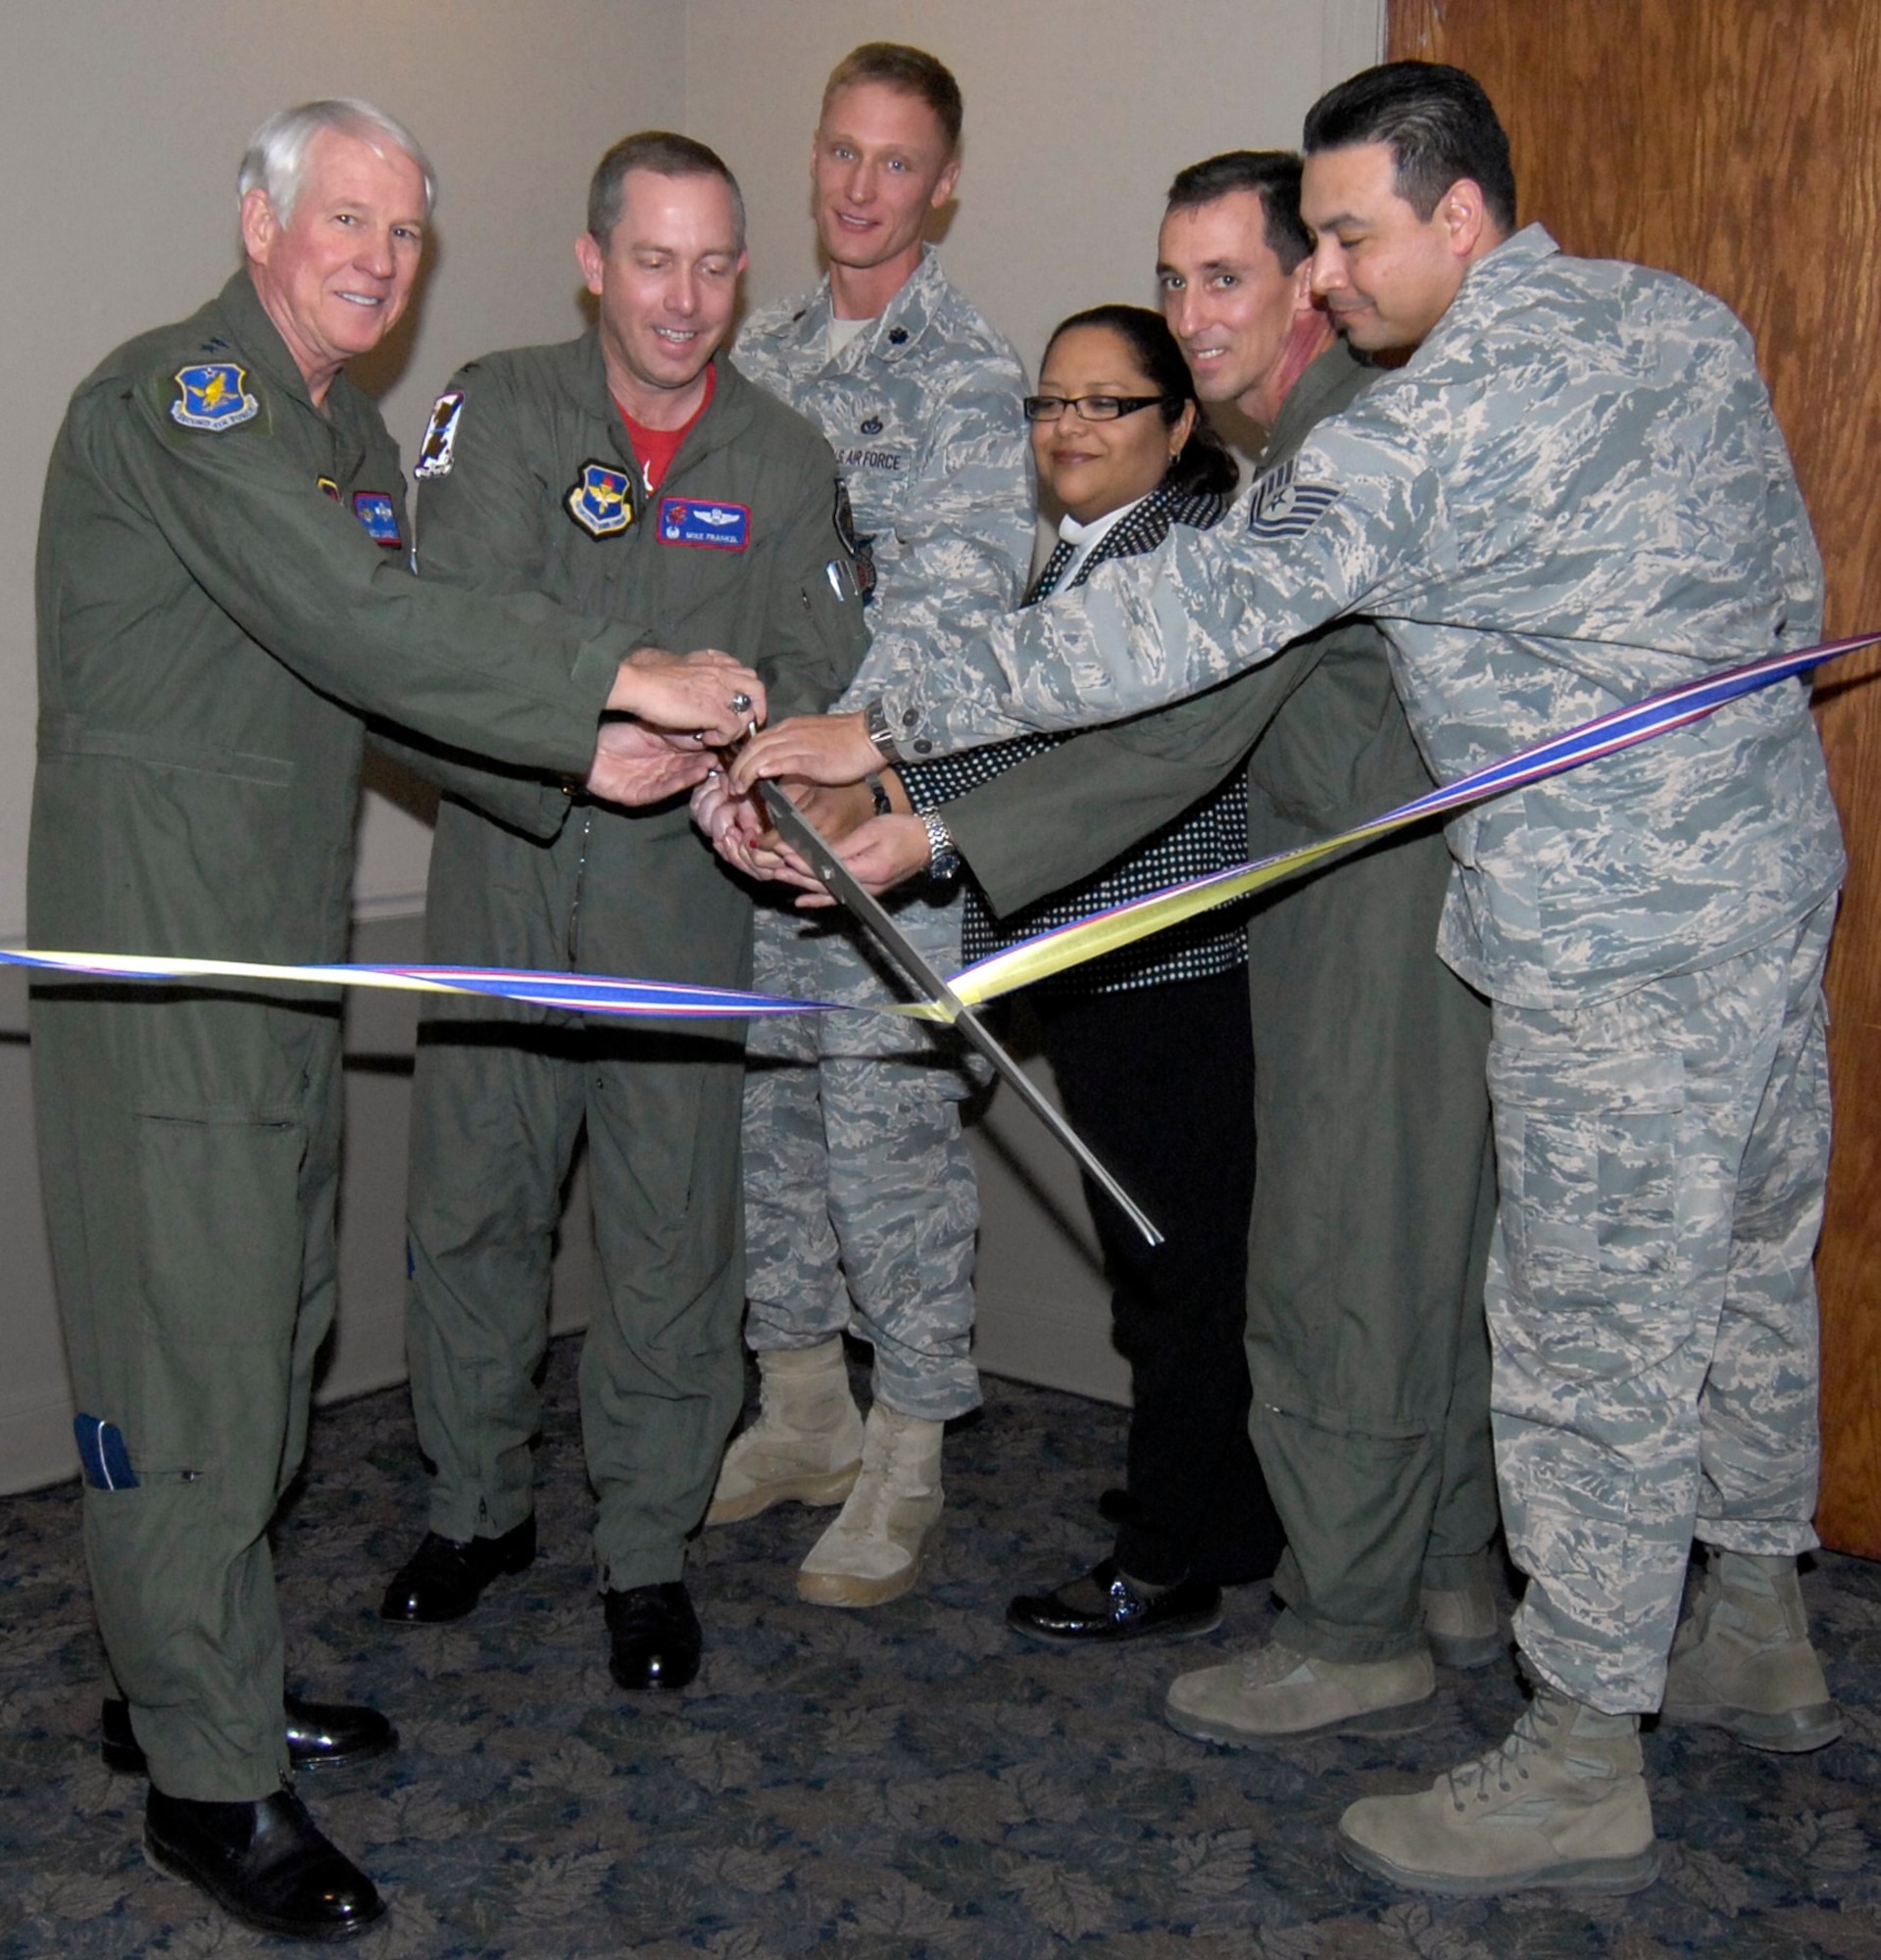 LAUGHLIN AIR FORCE BASE, Texas — Retired Gen. William Looney, Col. Michael Frankel, 47th Flying Training Wing commander, Lt. Col. Dee Katzer, 47th Civil Engineering Squadron commander, Lt. Col. William Rhyne, 47th Operations Support Squadron, Susan Powell, 47th Force Support Squadron and Tech. Sgt. Stephen Payne, 47th CES conduct a ceremonial ribbon cutting during Club XL’s bar grand reopening Feb. 4. (U.S. Air Force photo by Jose Mendoza)